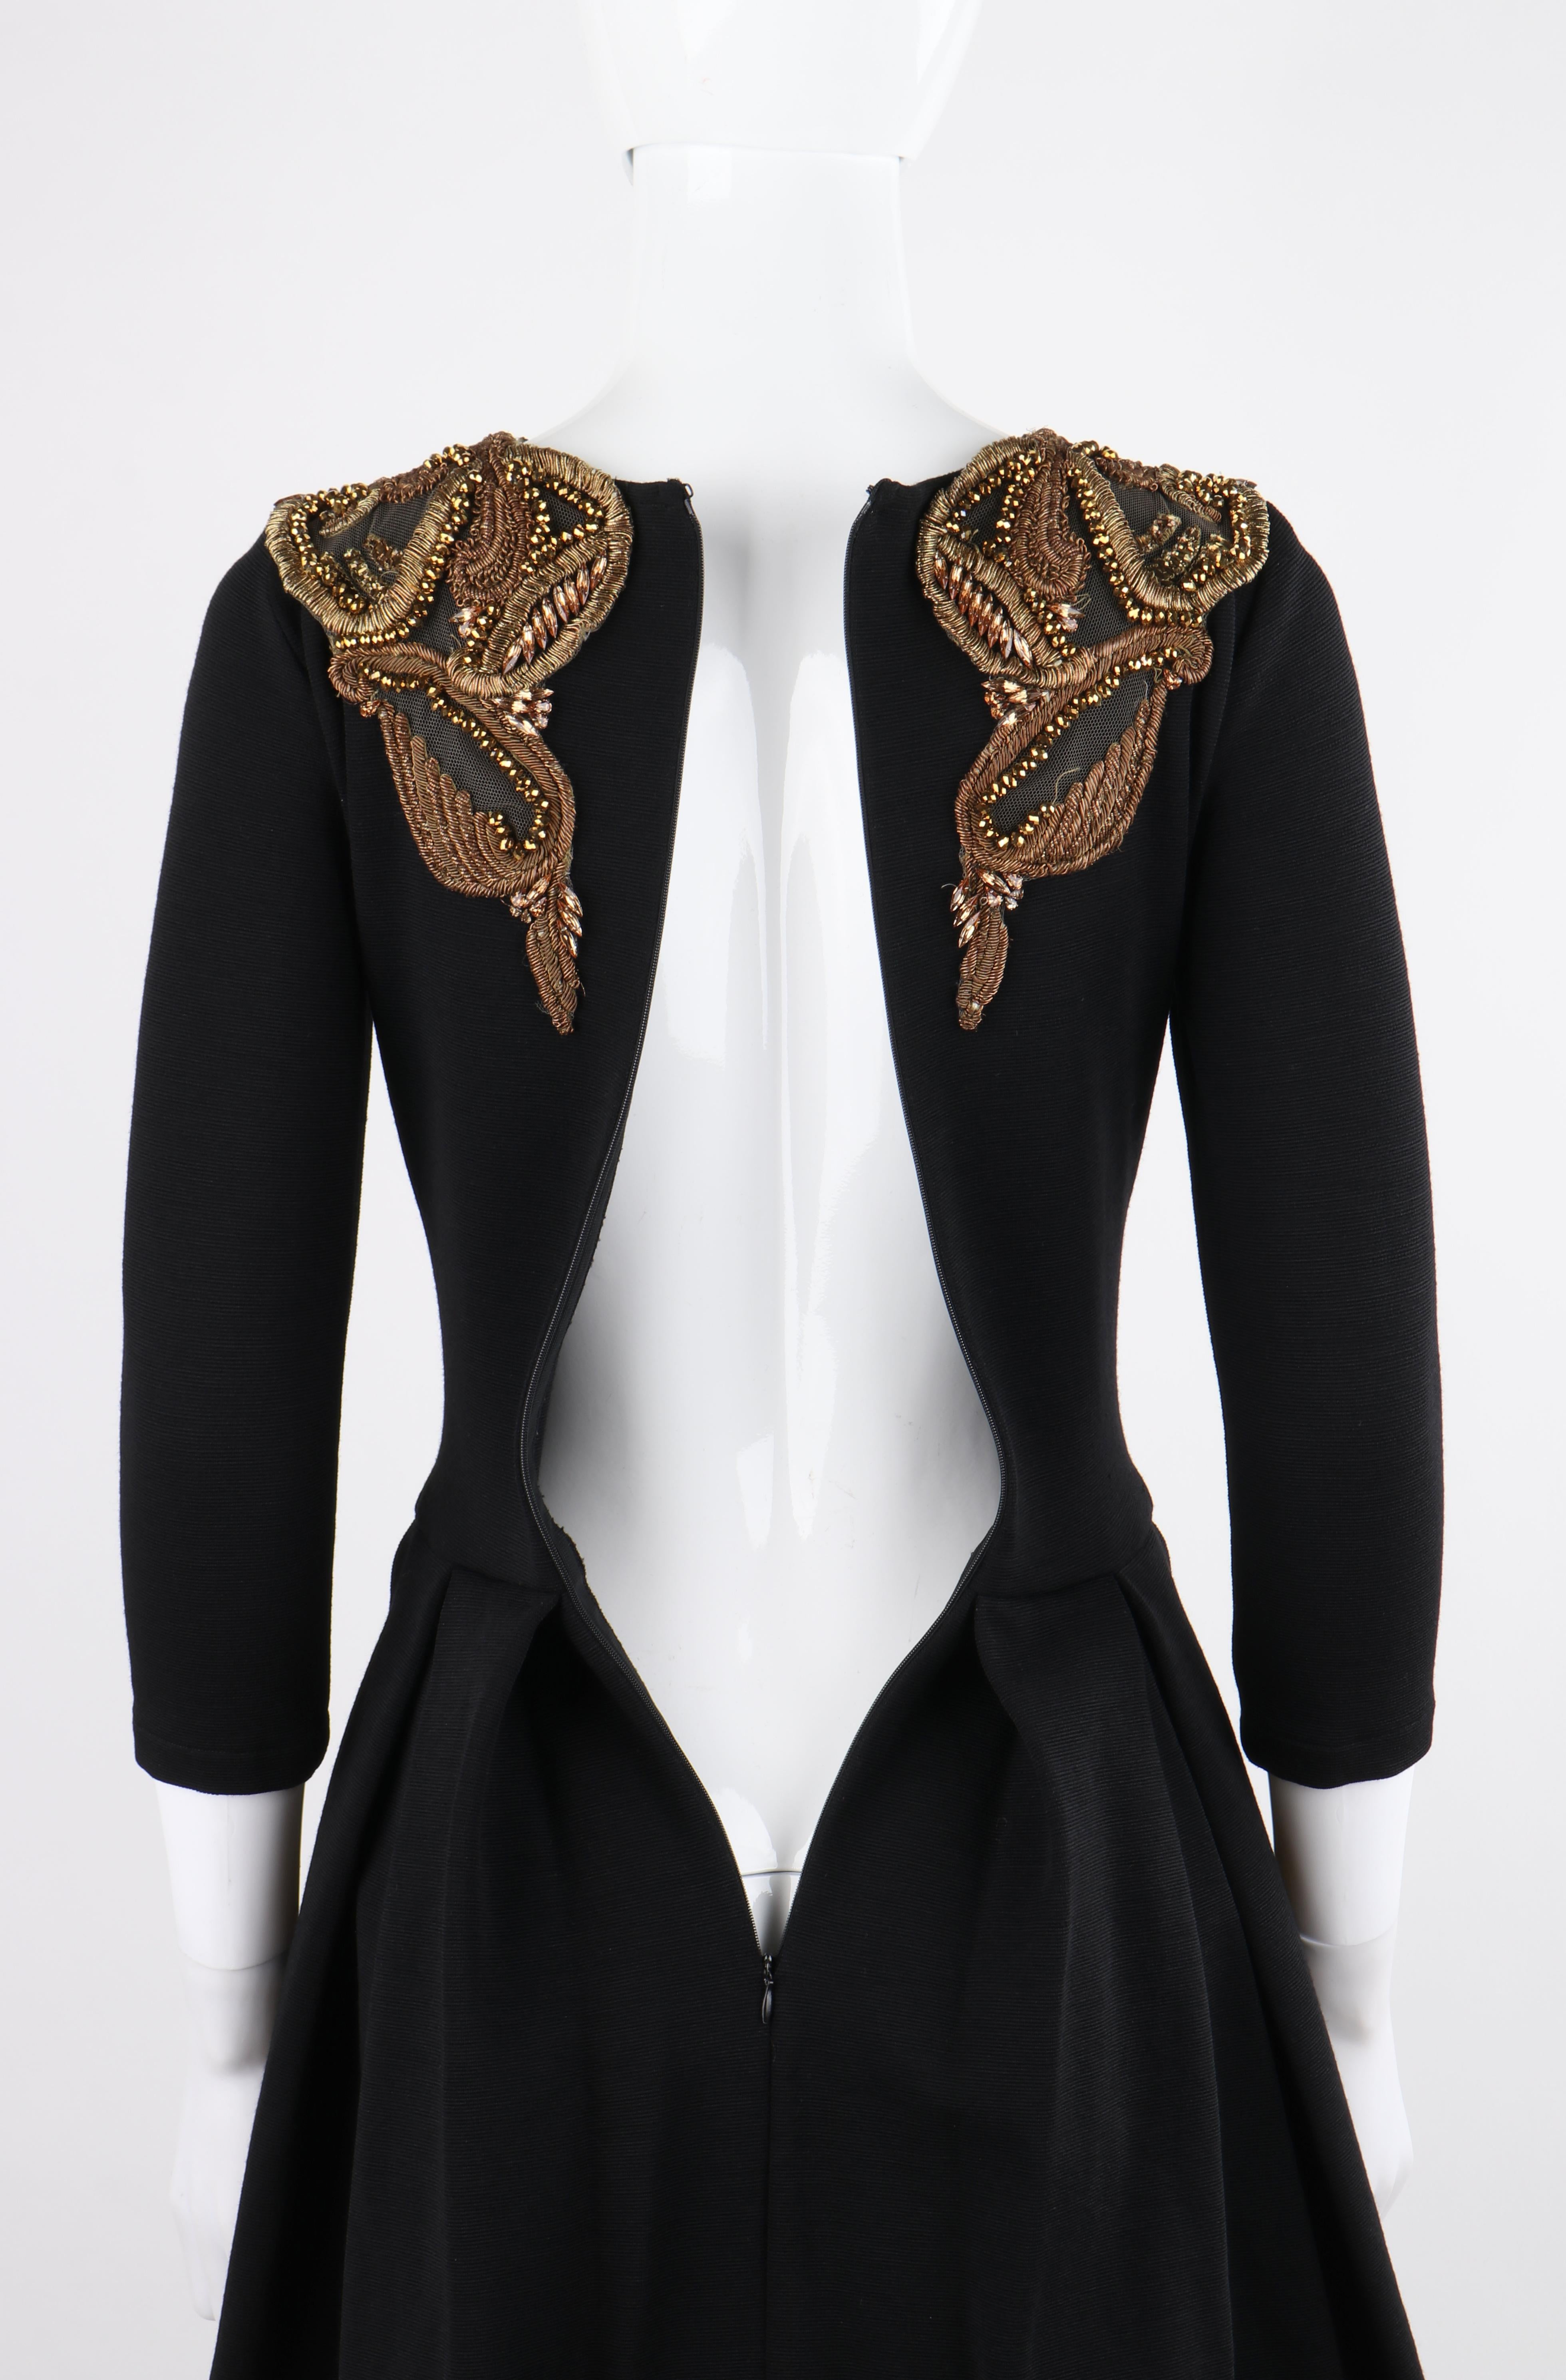 ALEXANDER McQUEEN A/W 2010 “Angels & Demons” Black Gold Beaded Fit n Flare Dress For Sale 2